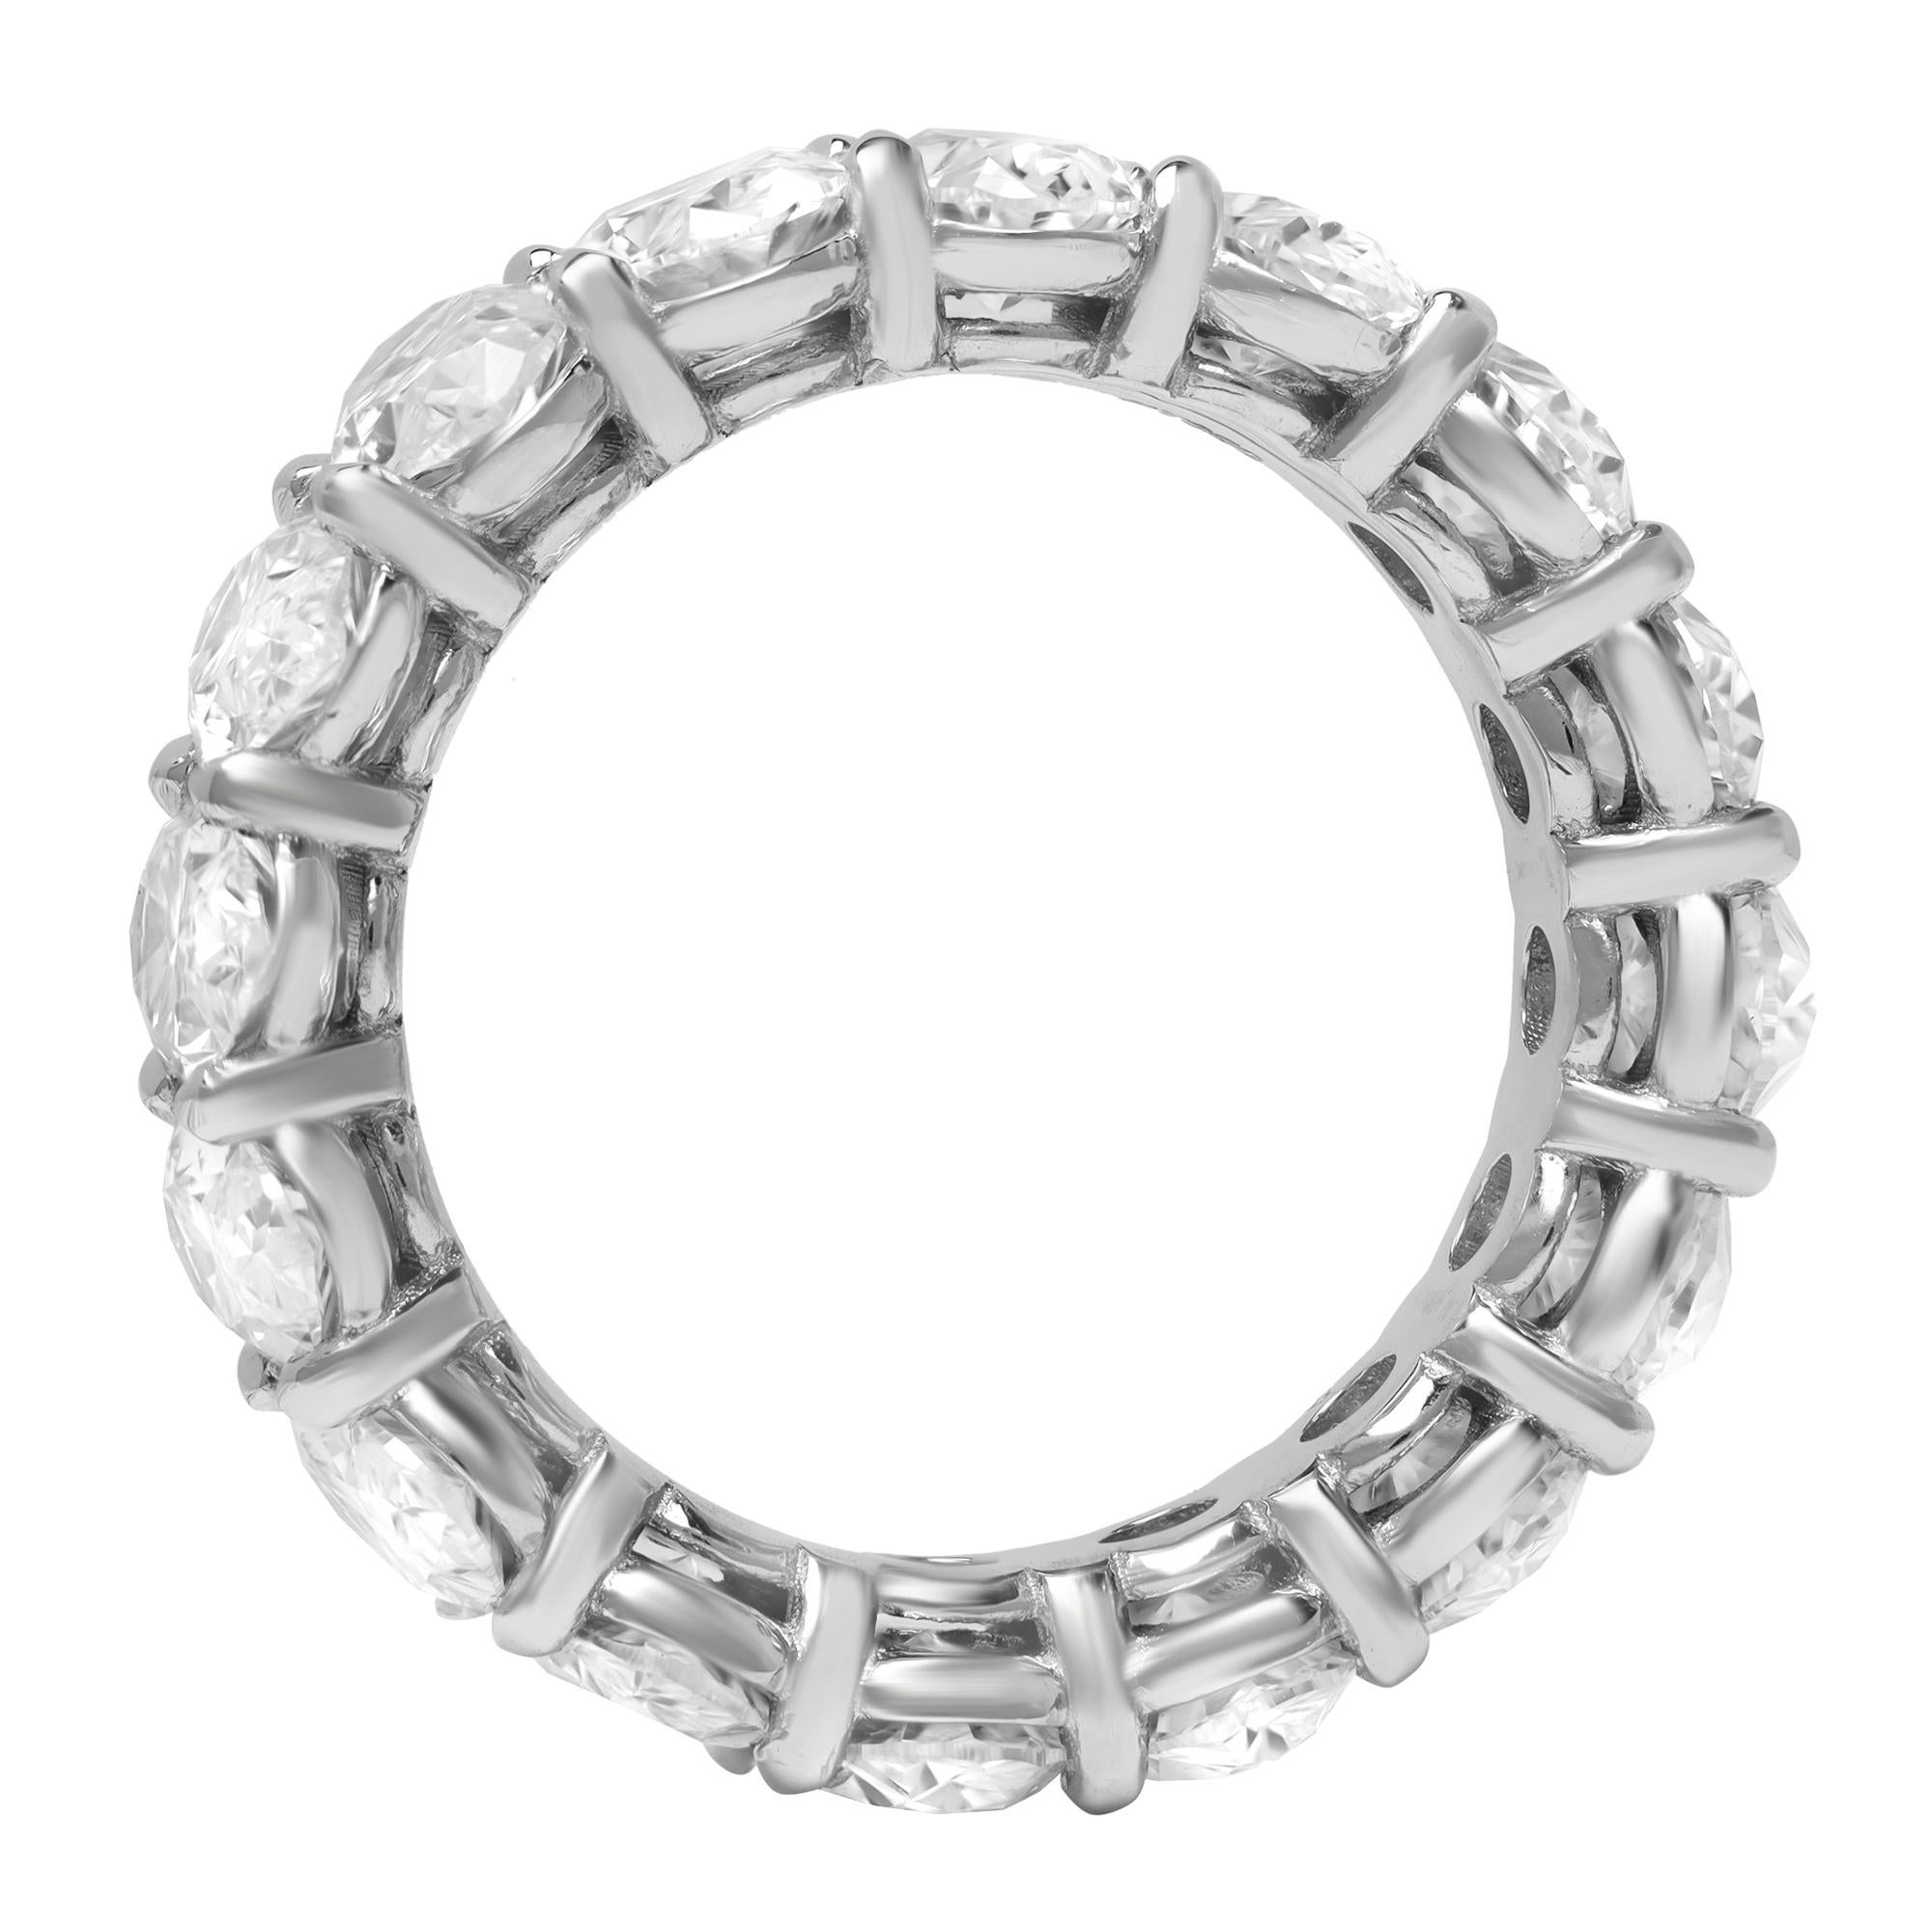 This 6.77cttw oval eternity ring celebrates the power of love with breathtaking brilliance set within the enduring luster of platinum. Prong set with a total of 16 excellent cut oval stones. Diamond color F and VS1 clarity. Width: 6.30mm. Ring size